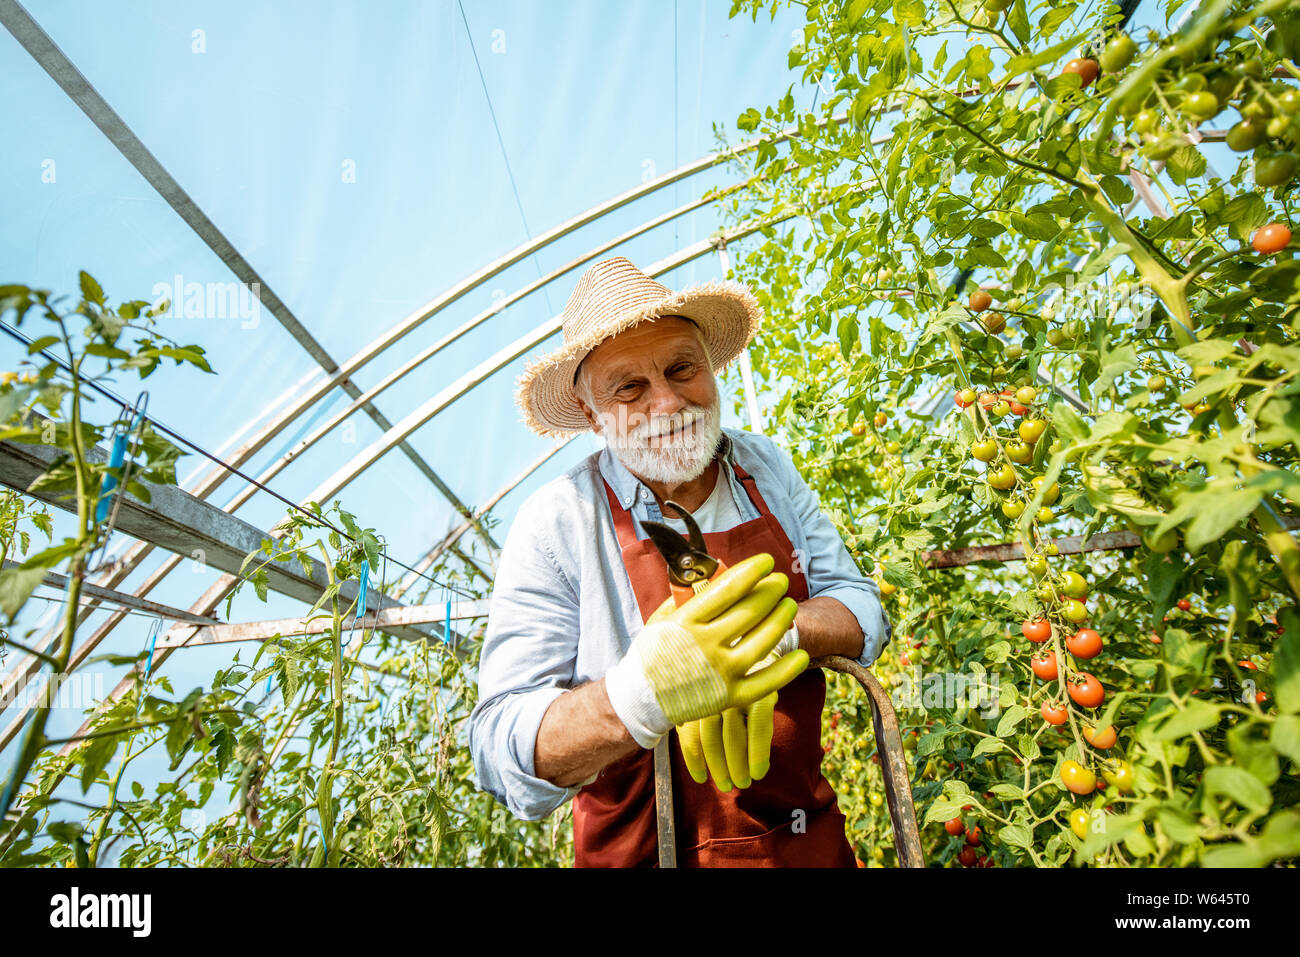 Portrait of a well-dressed senior man, standing on a ladder as an agronomist taking care of tomato plantation on a small agricultural farm Stock Photo